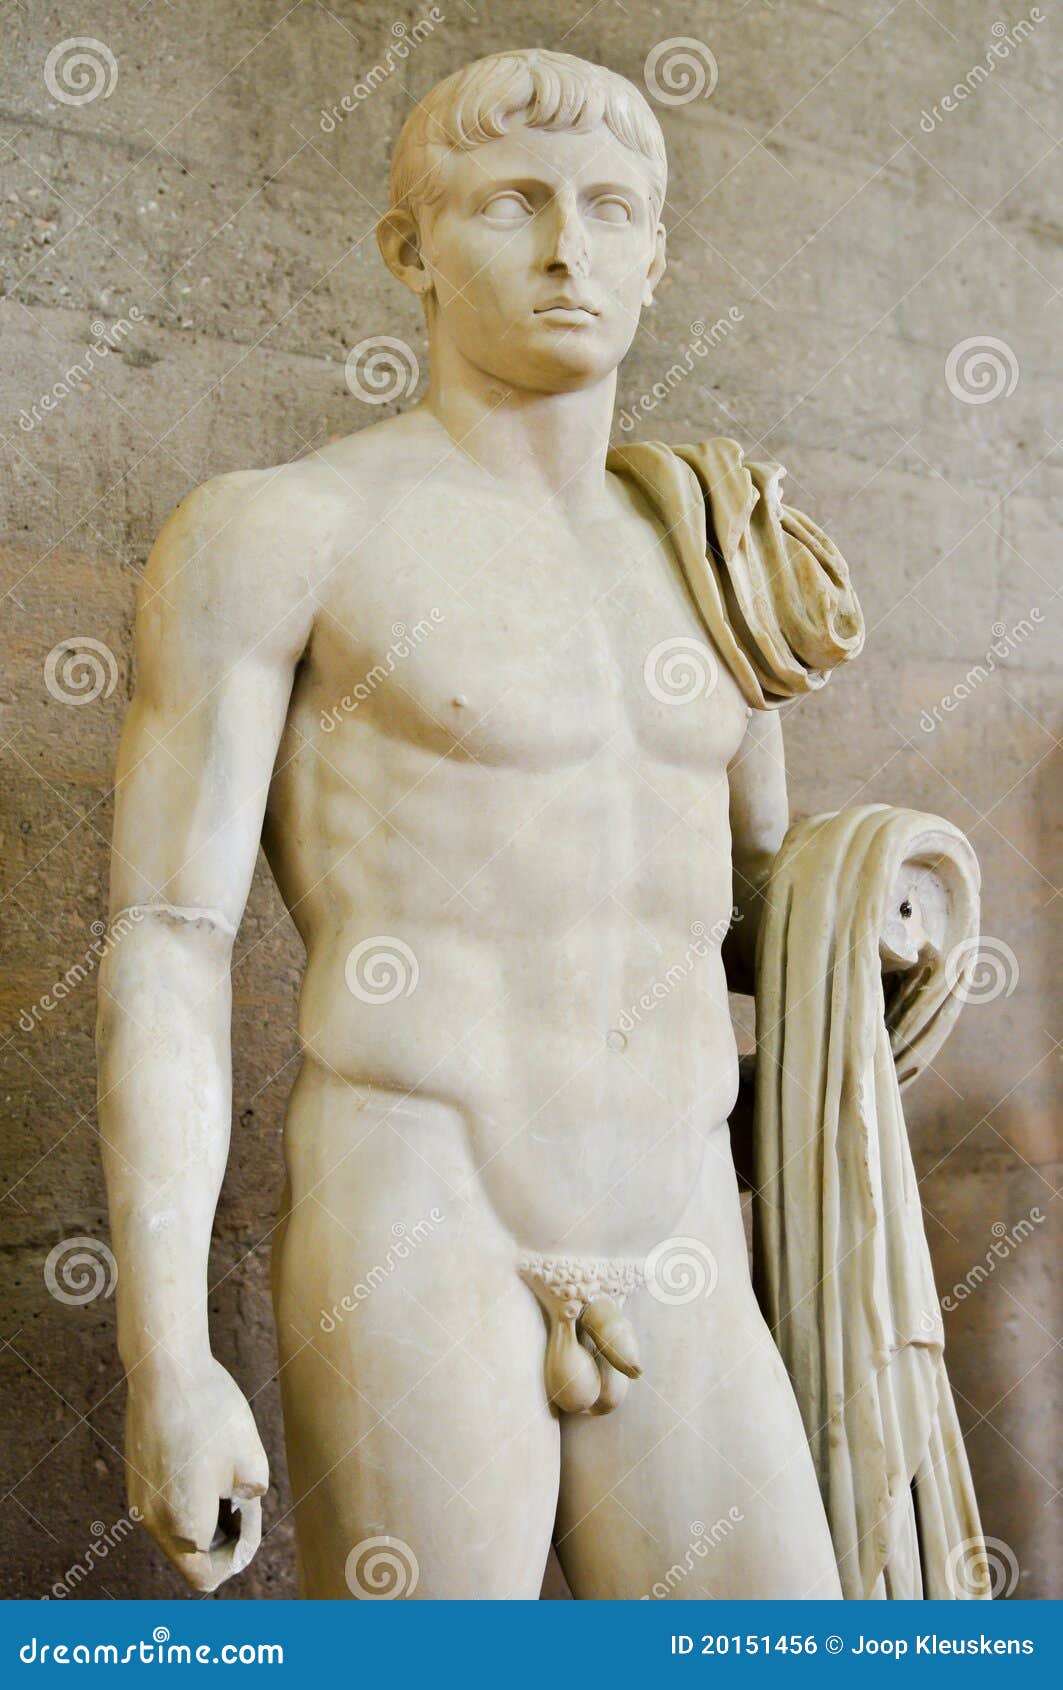 Sexy Nude Human Statue Images